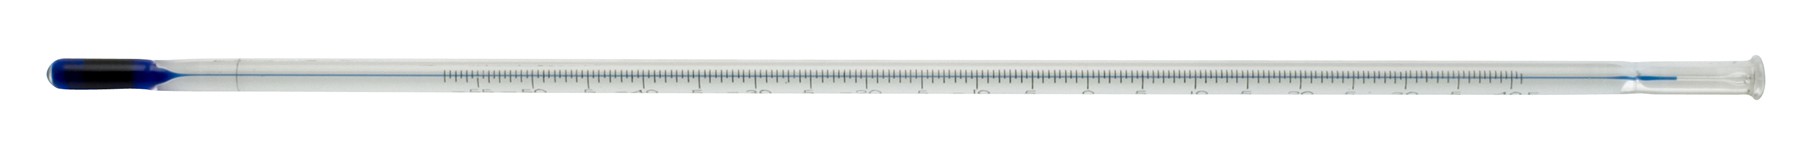 H-B DURAC Plus ASTM Like Liquid-In-Glass Thermometer; 5F / Cloud and Pour, 108mm Immersion, -36 to 120F, Organic Liquid Fill